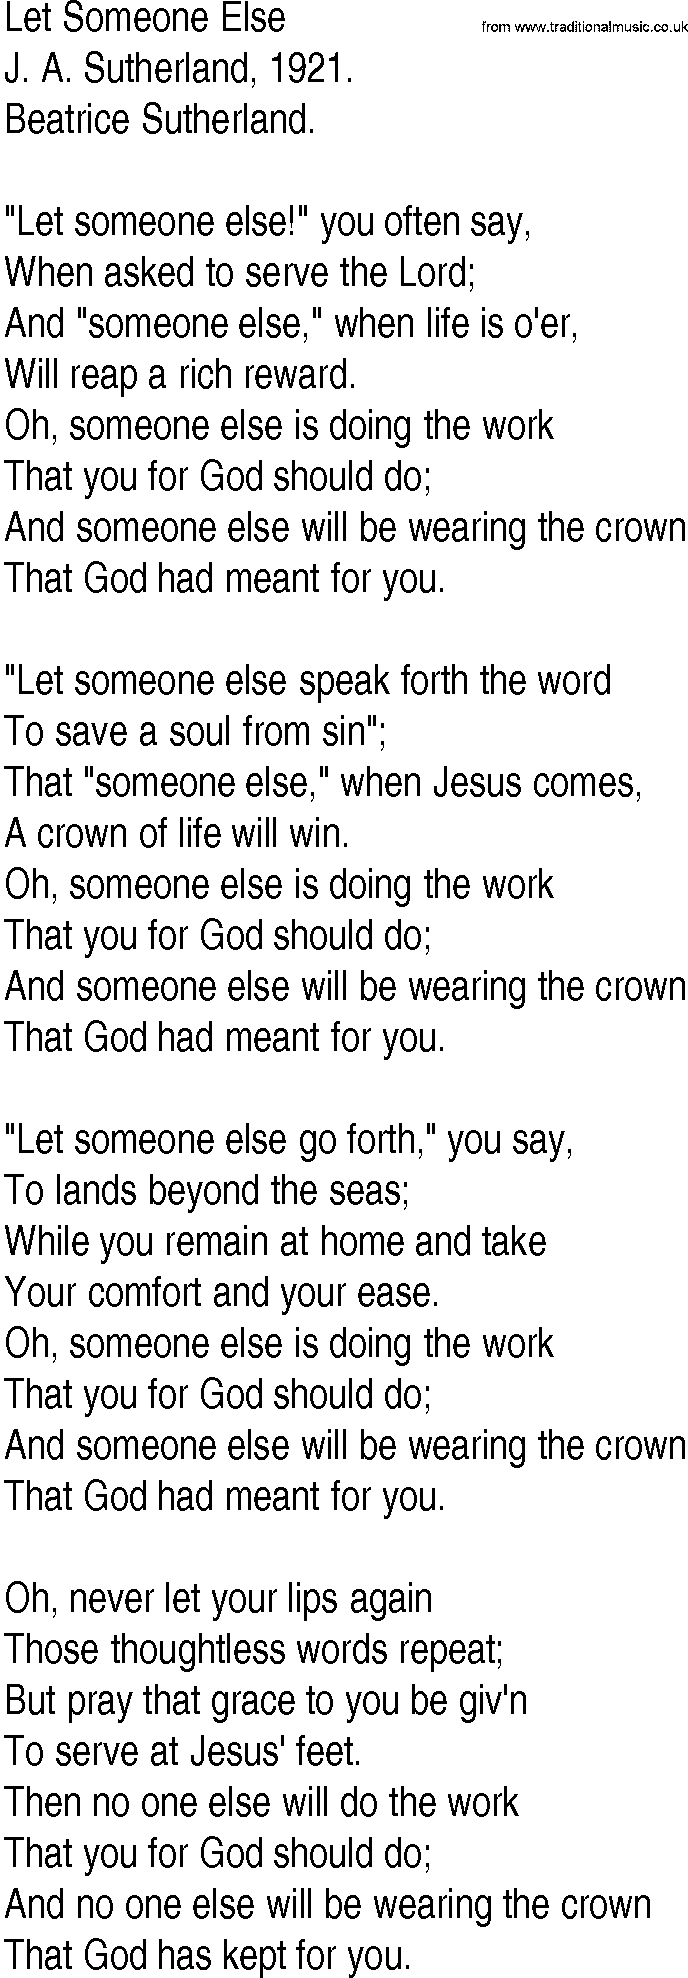 Hymn and Gospel Song: Let Someone Else by J A Sutherland lyrics